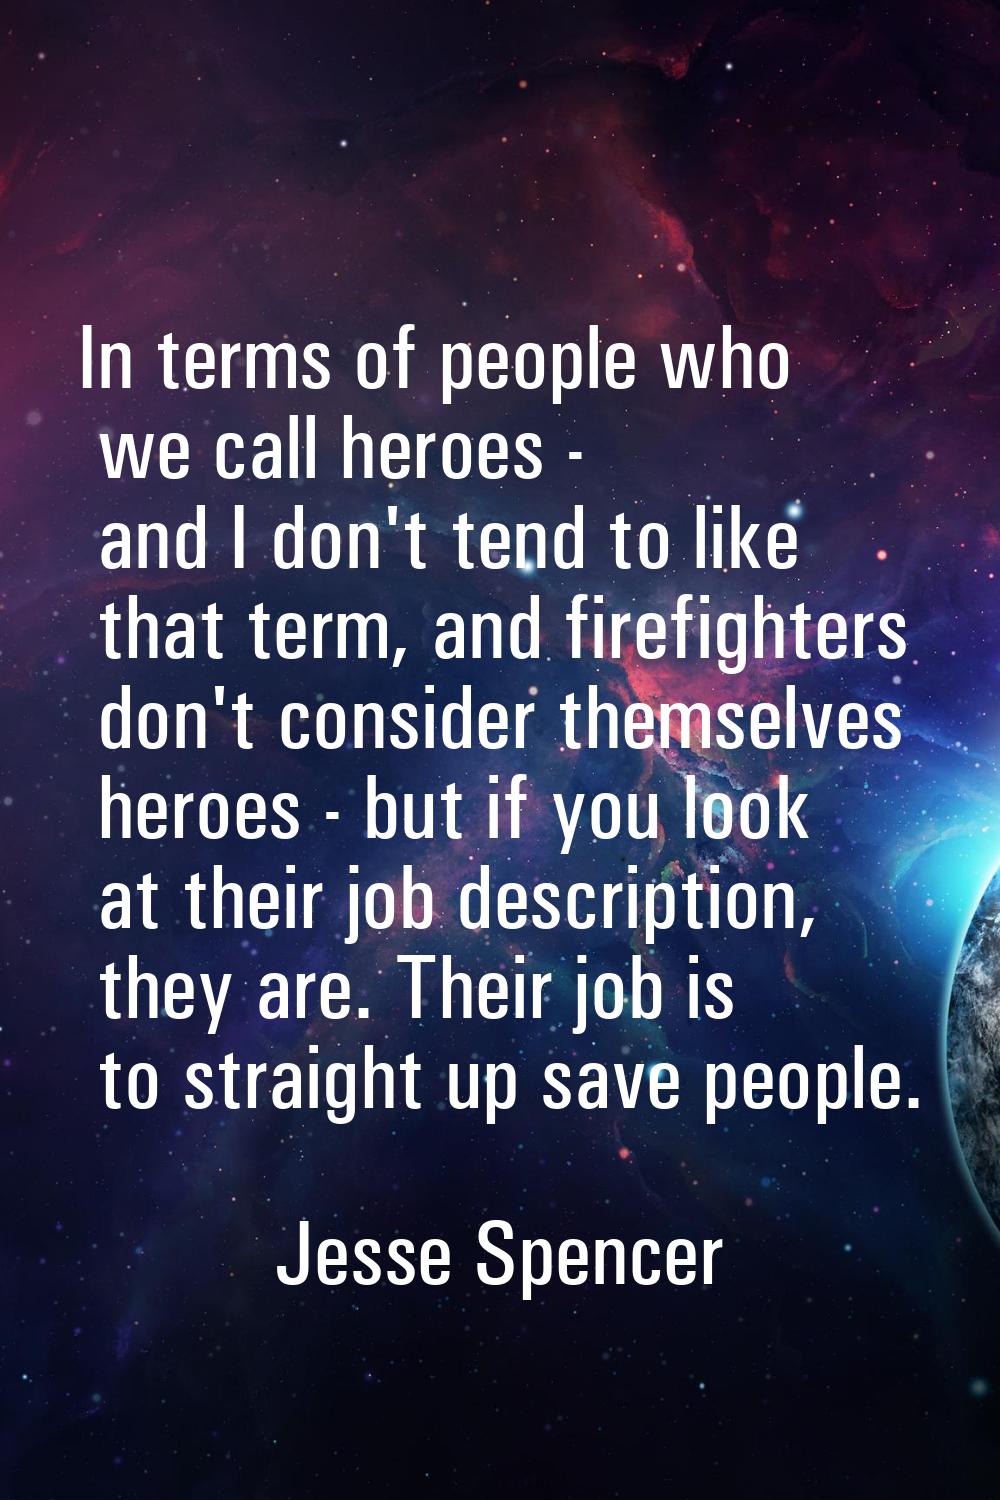 In terms of people who we call heroes - and I don't tend to like that term, and firefighters don't 